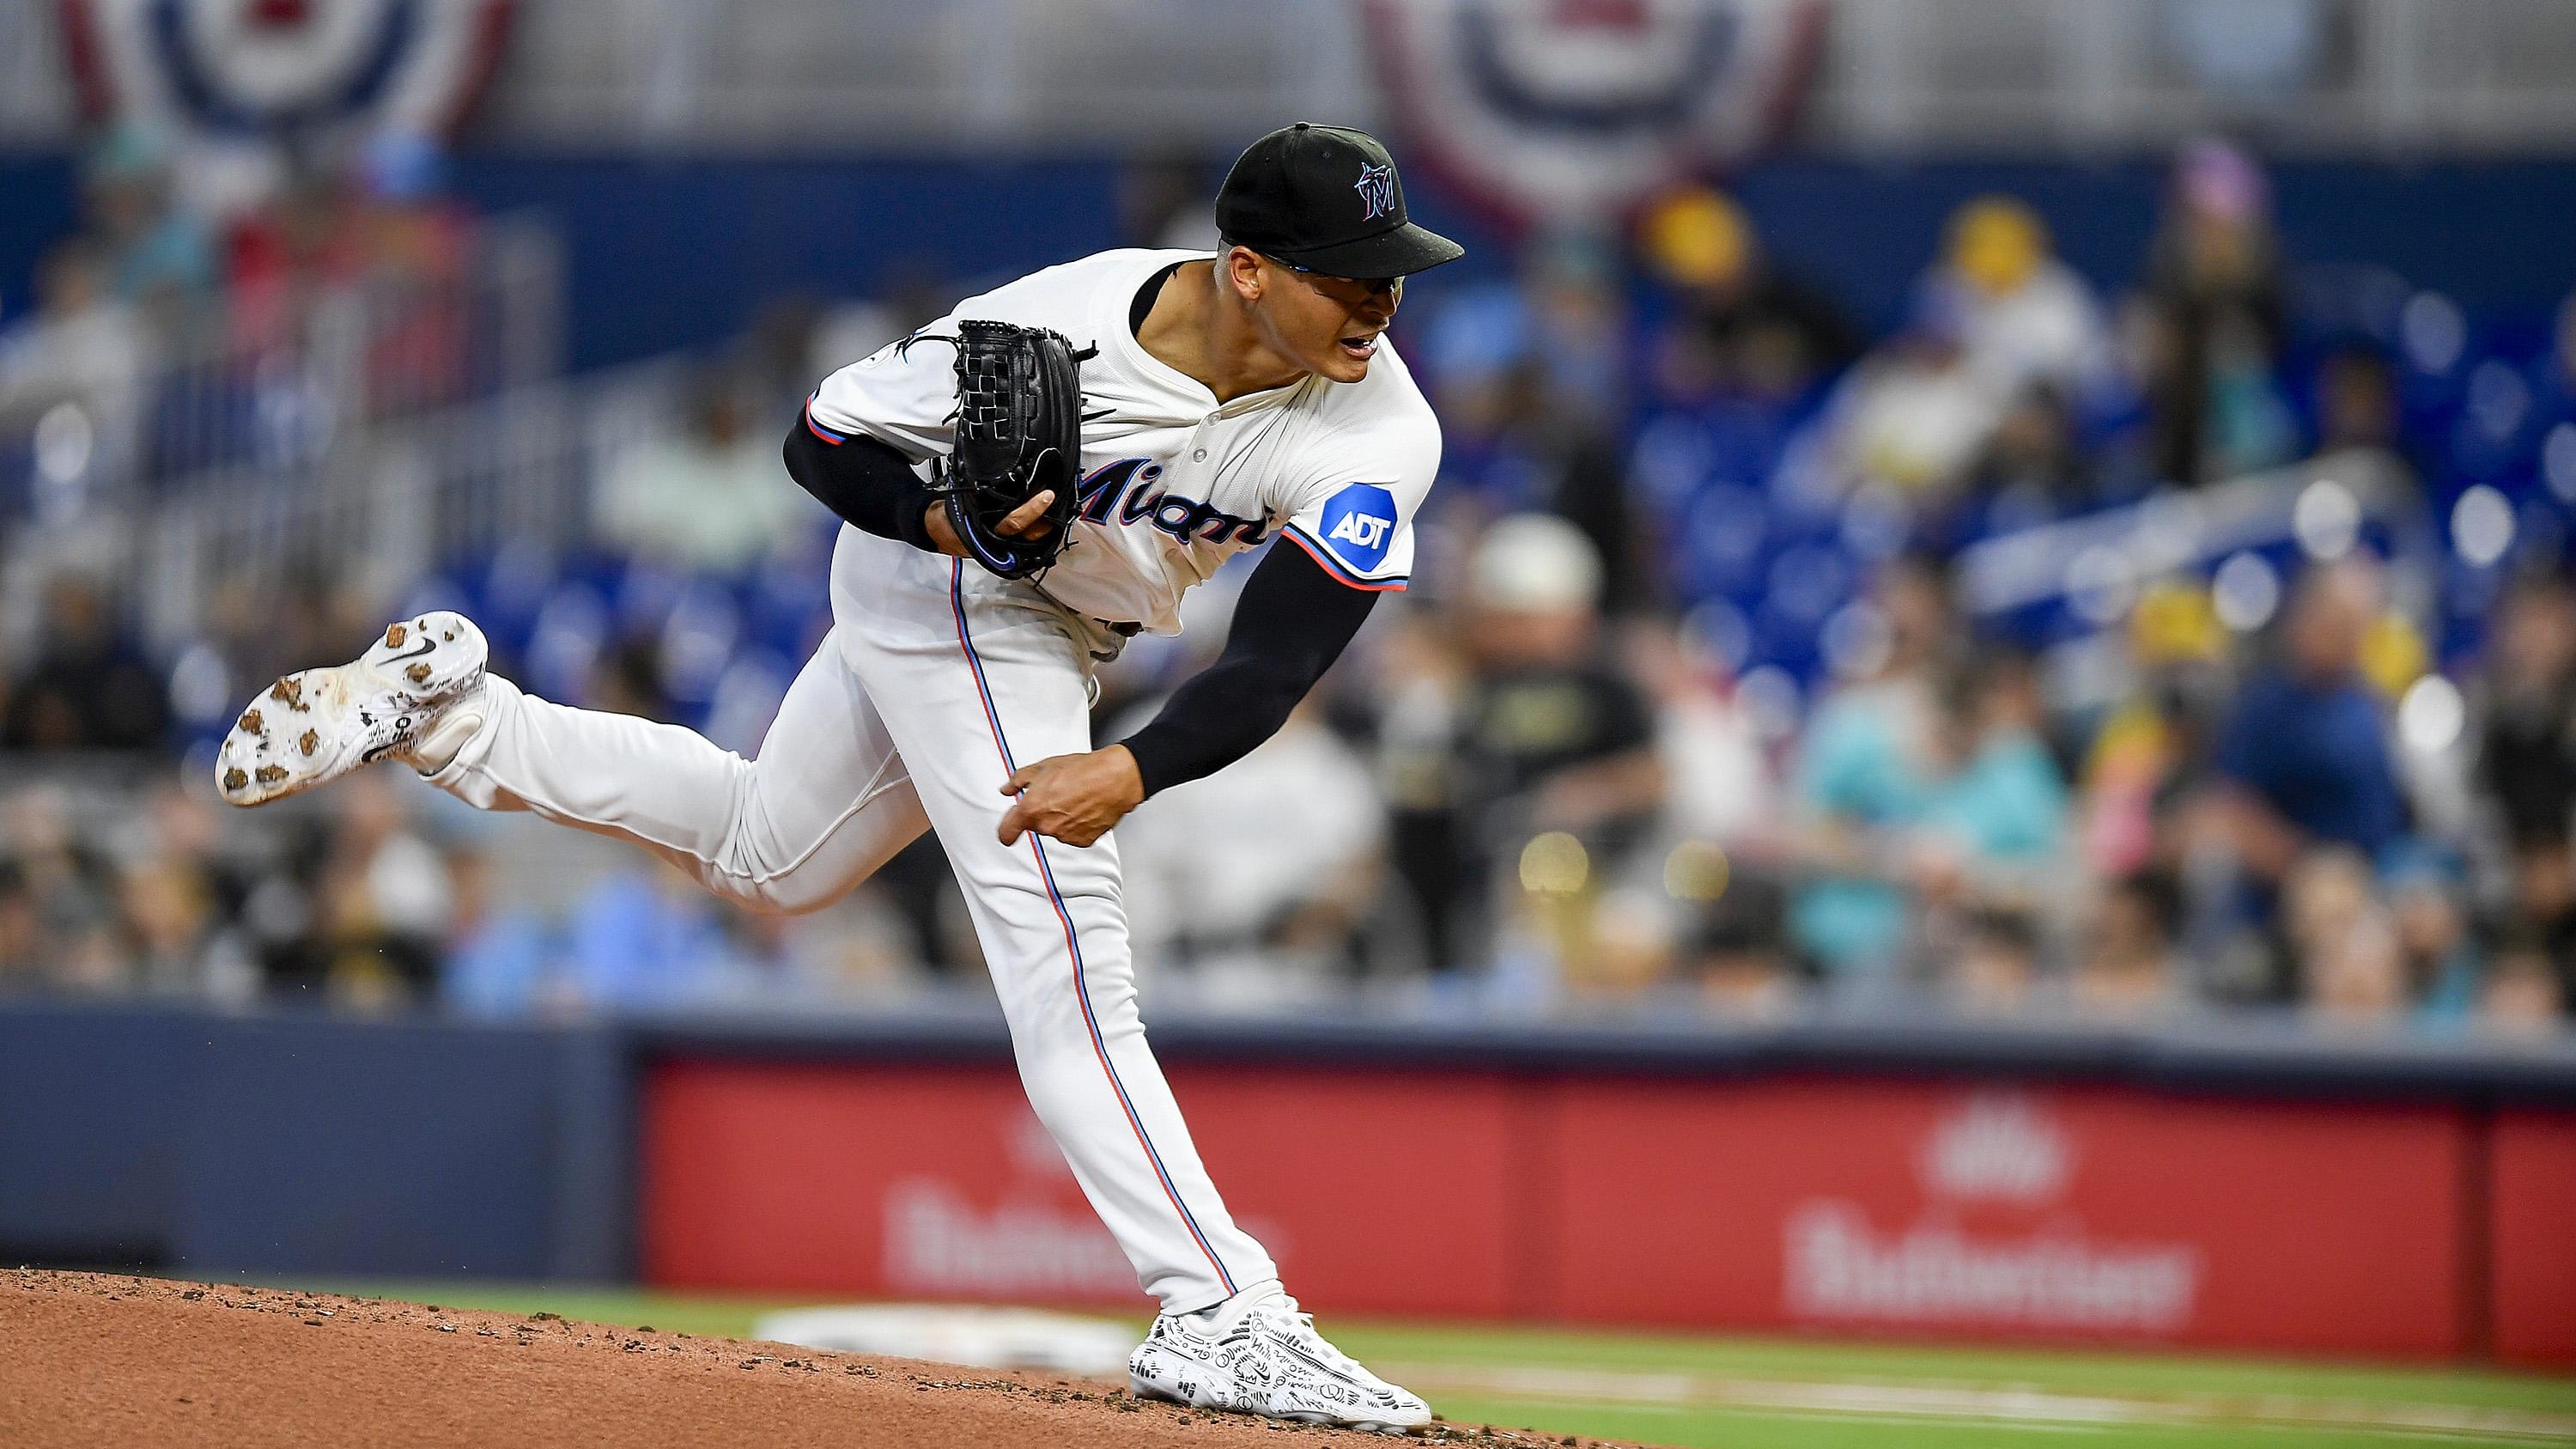 Marlins Ace Is Widely Expected To Be Traded; Should Mets Make Move?